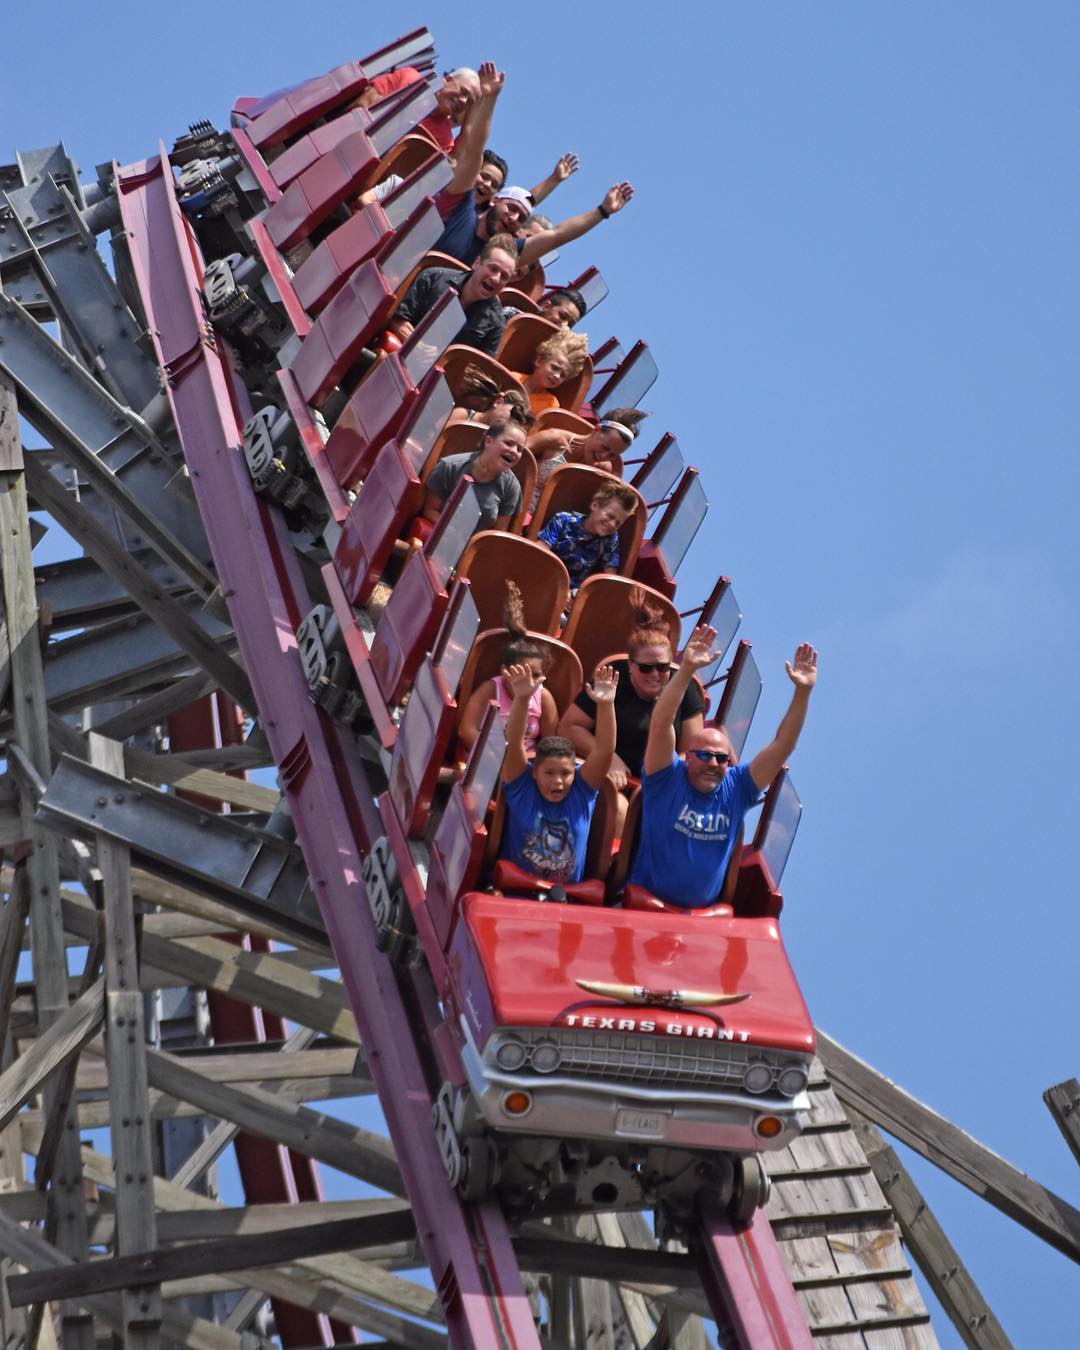 Riders hold up their arms on a rollercoaster Photo by Instagram user @sixflagsovertexas